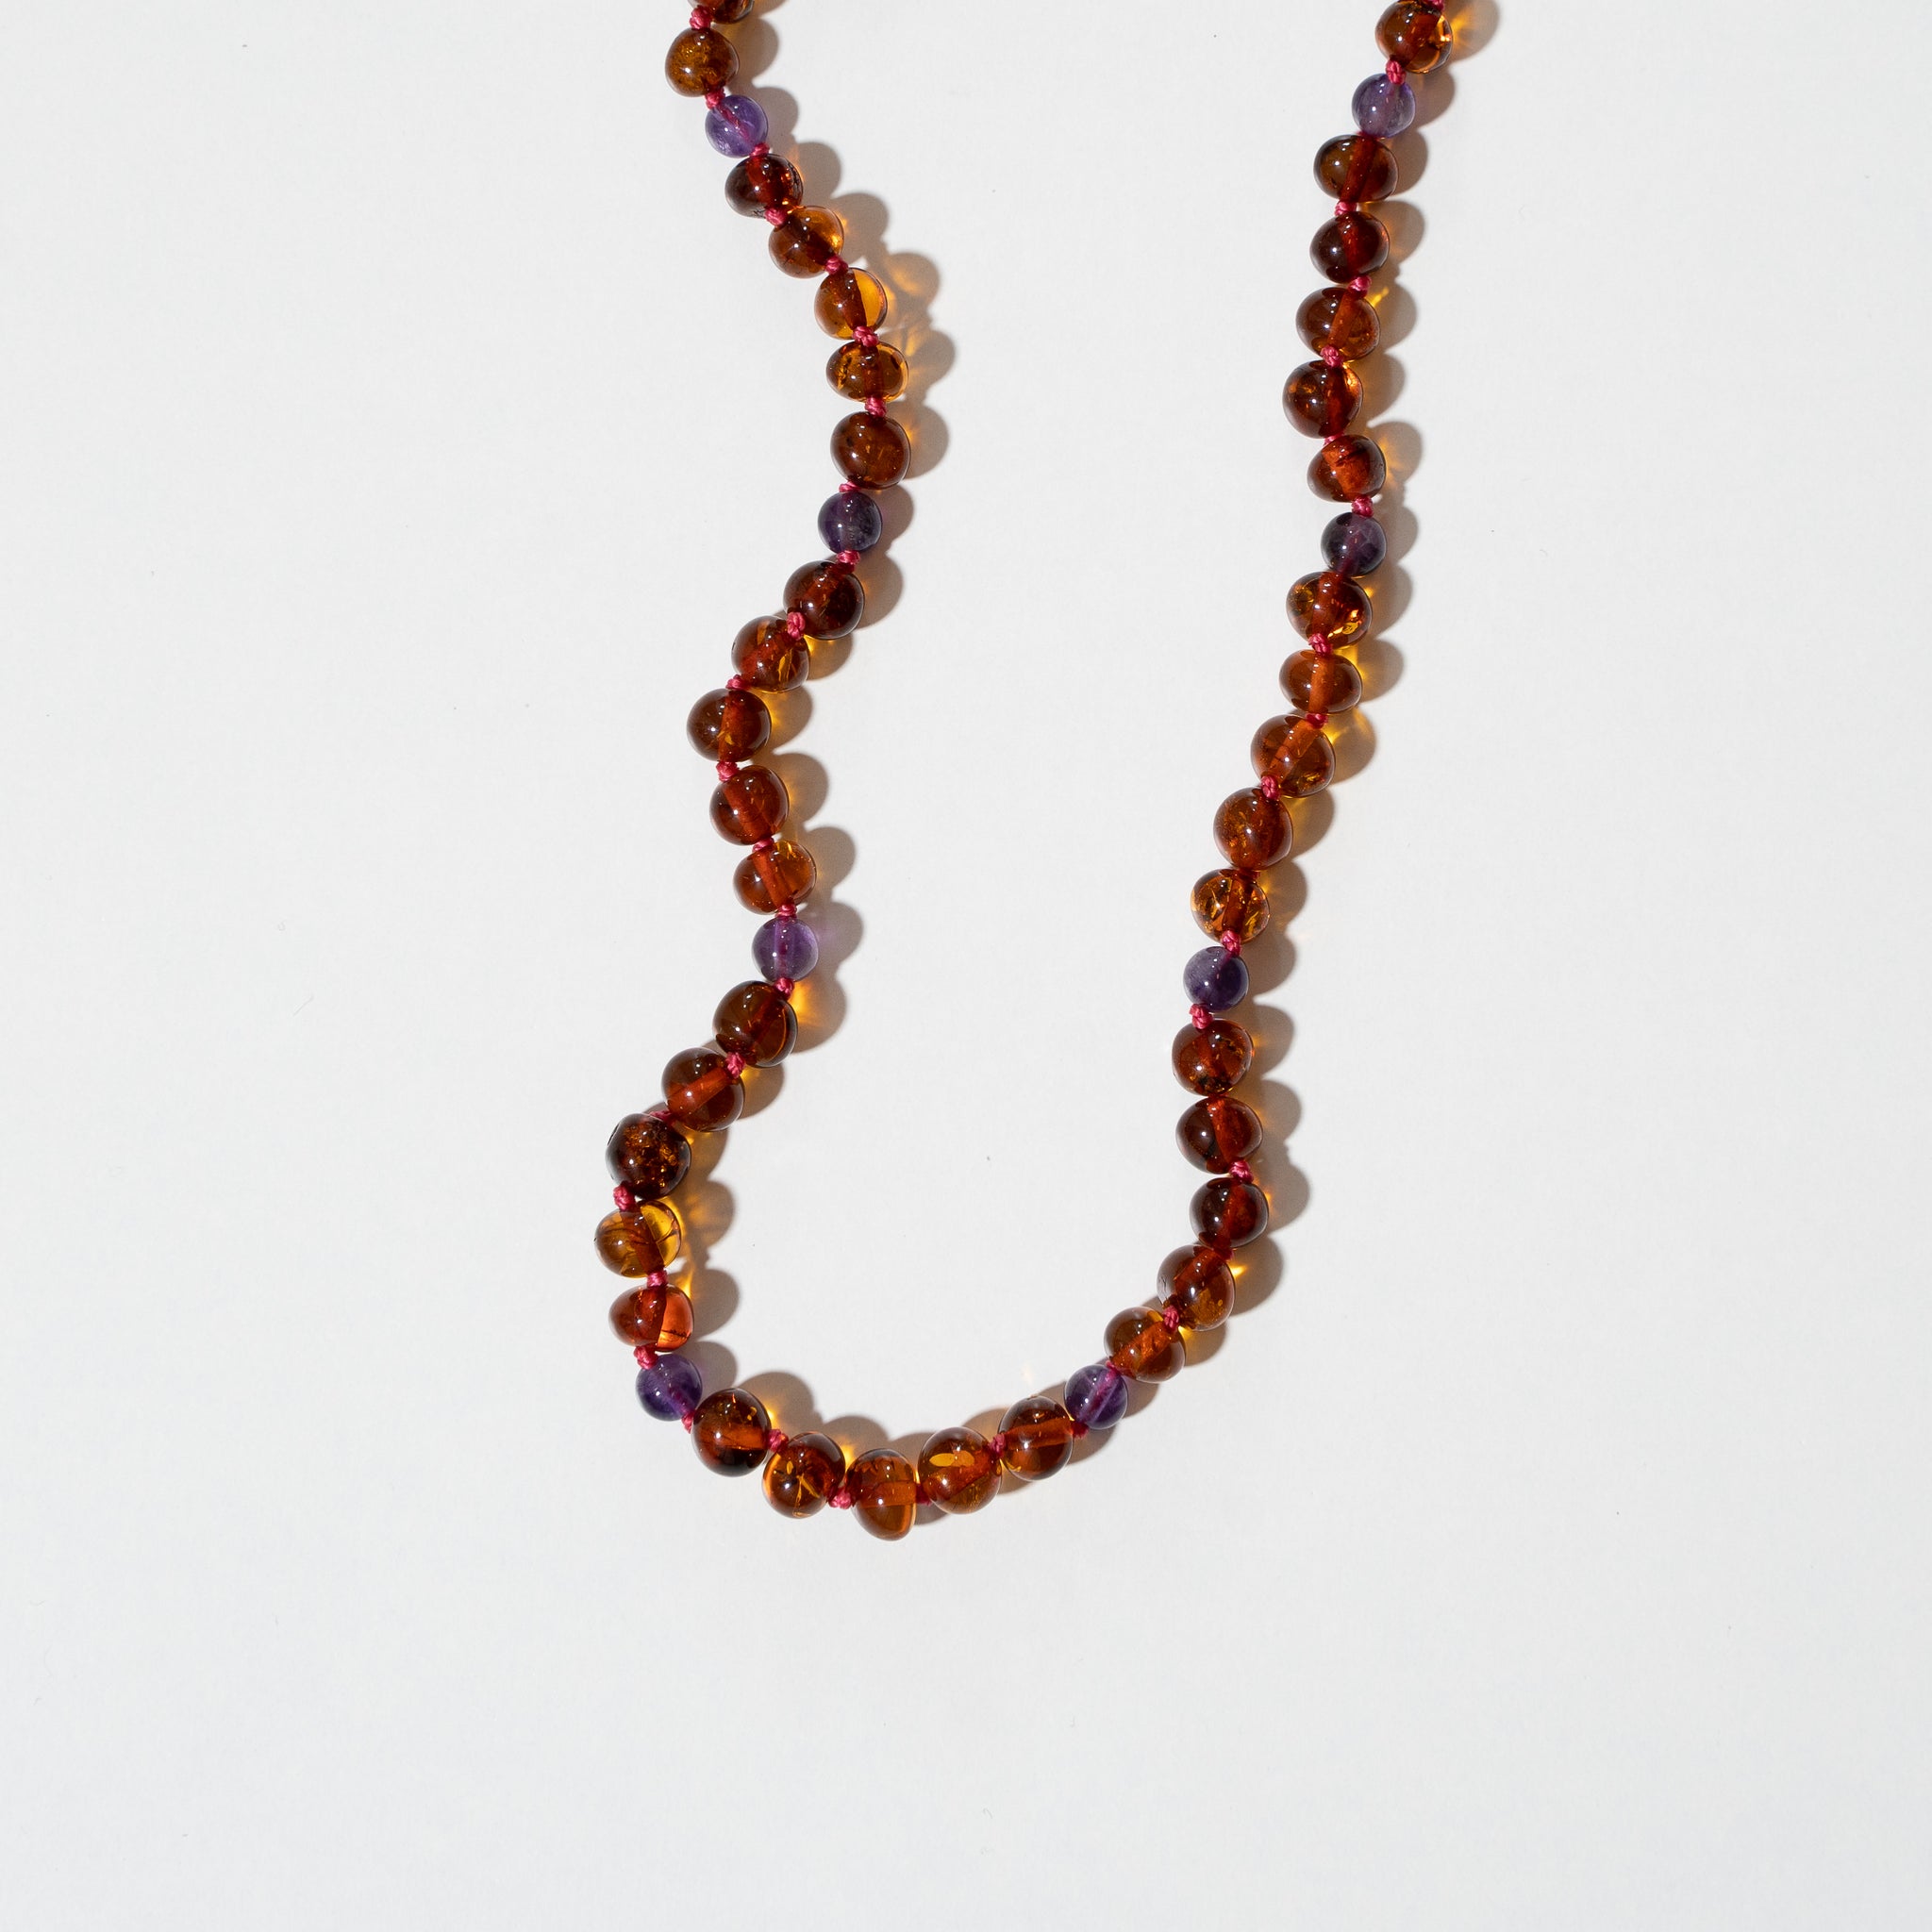 Amber Necklace - Long | Crystal Life Technology, Inc